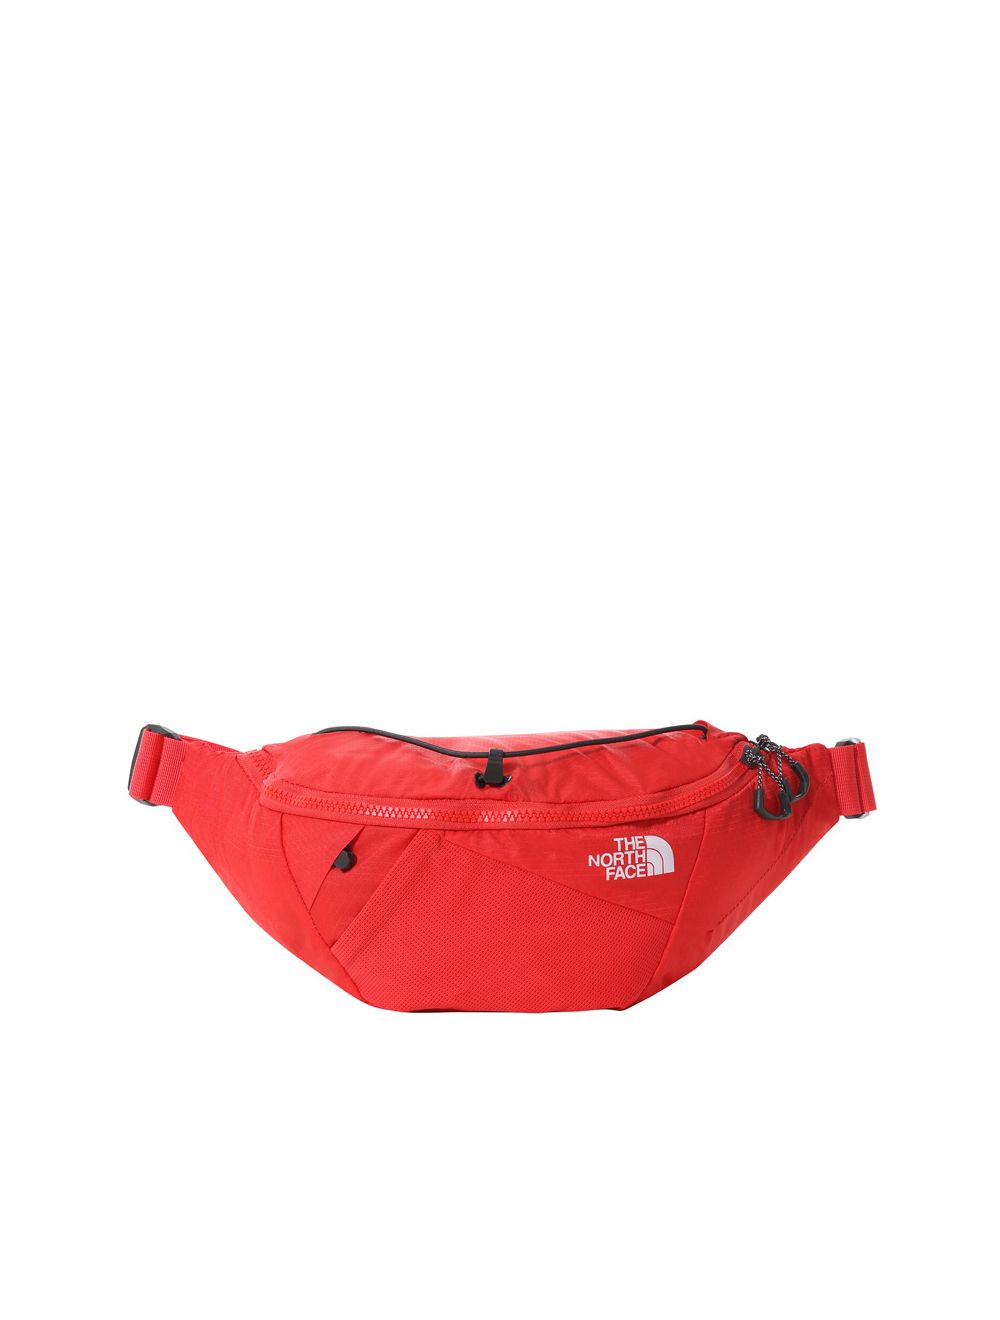 THE NORTH FACE Pas biodrowy LUMBNICAL S horizon red-tnf white 